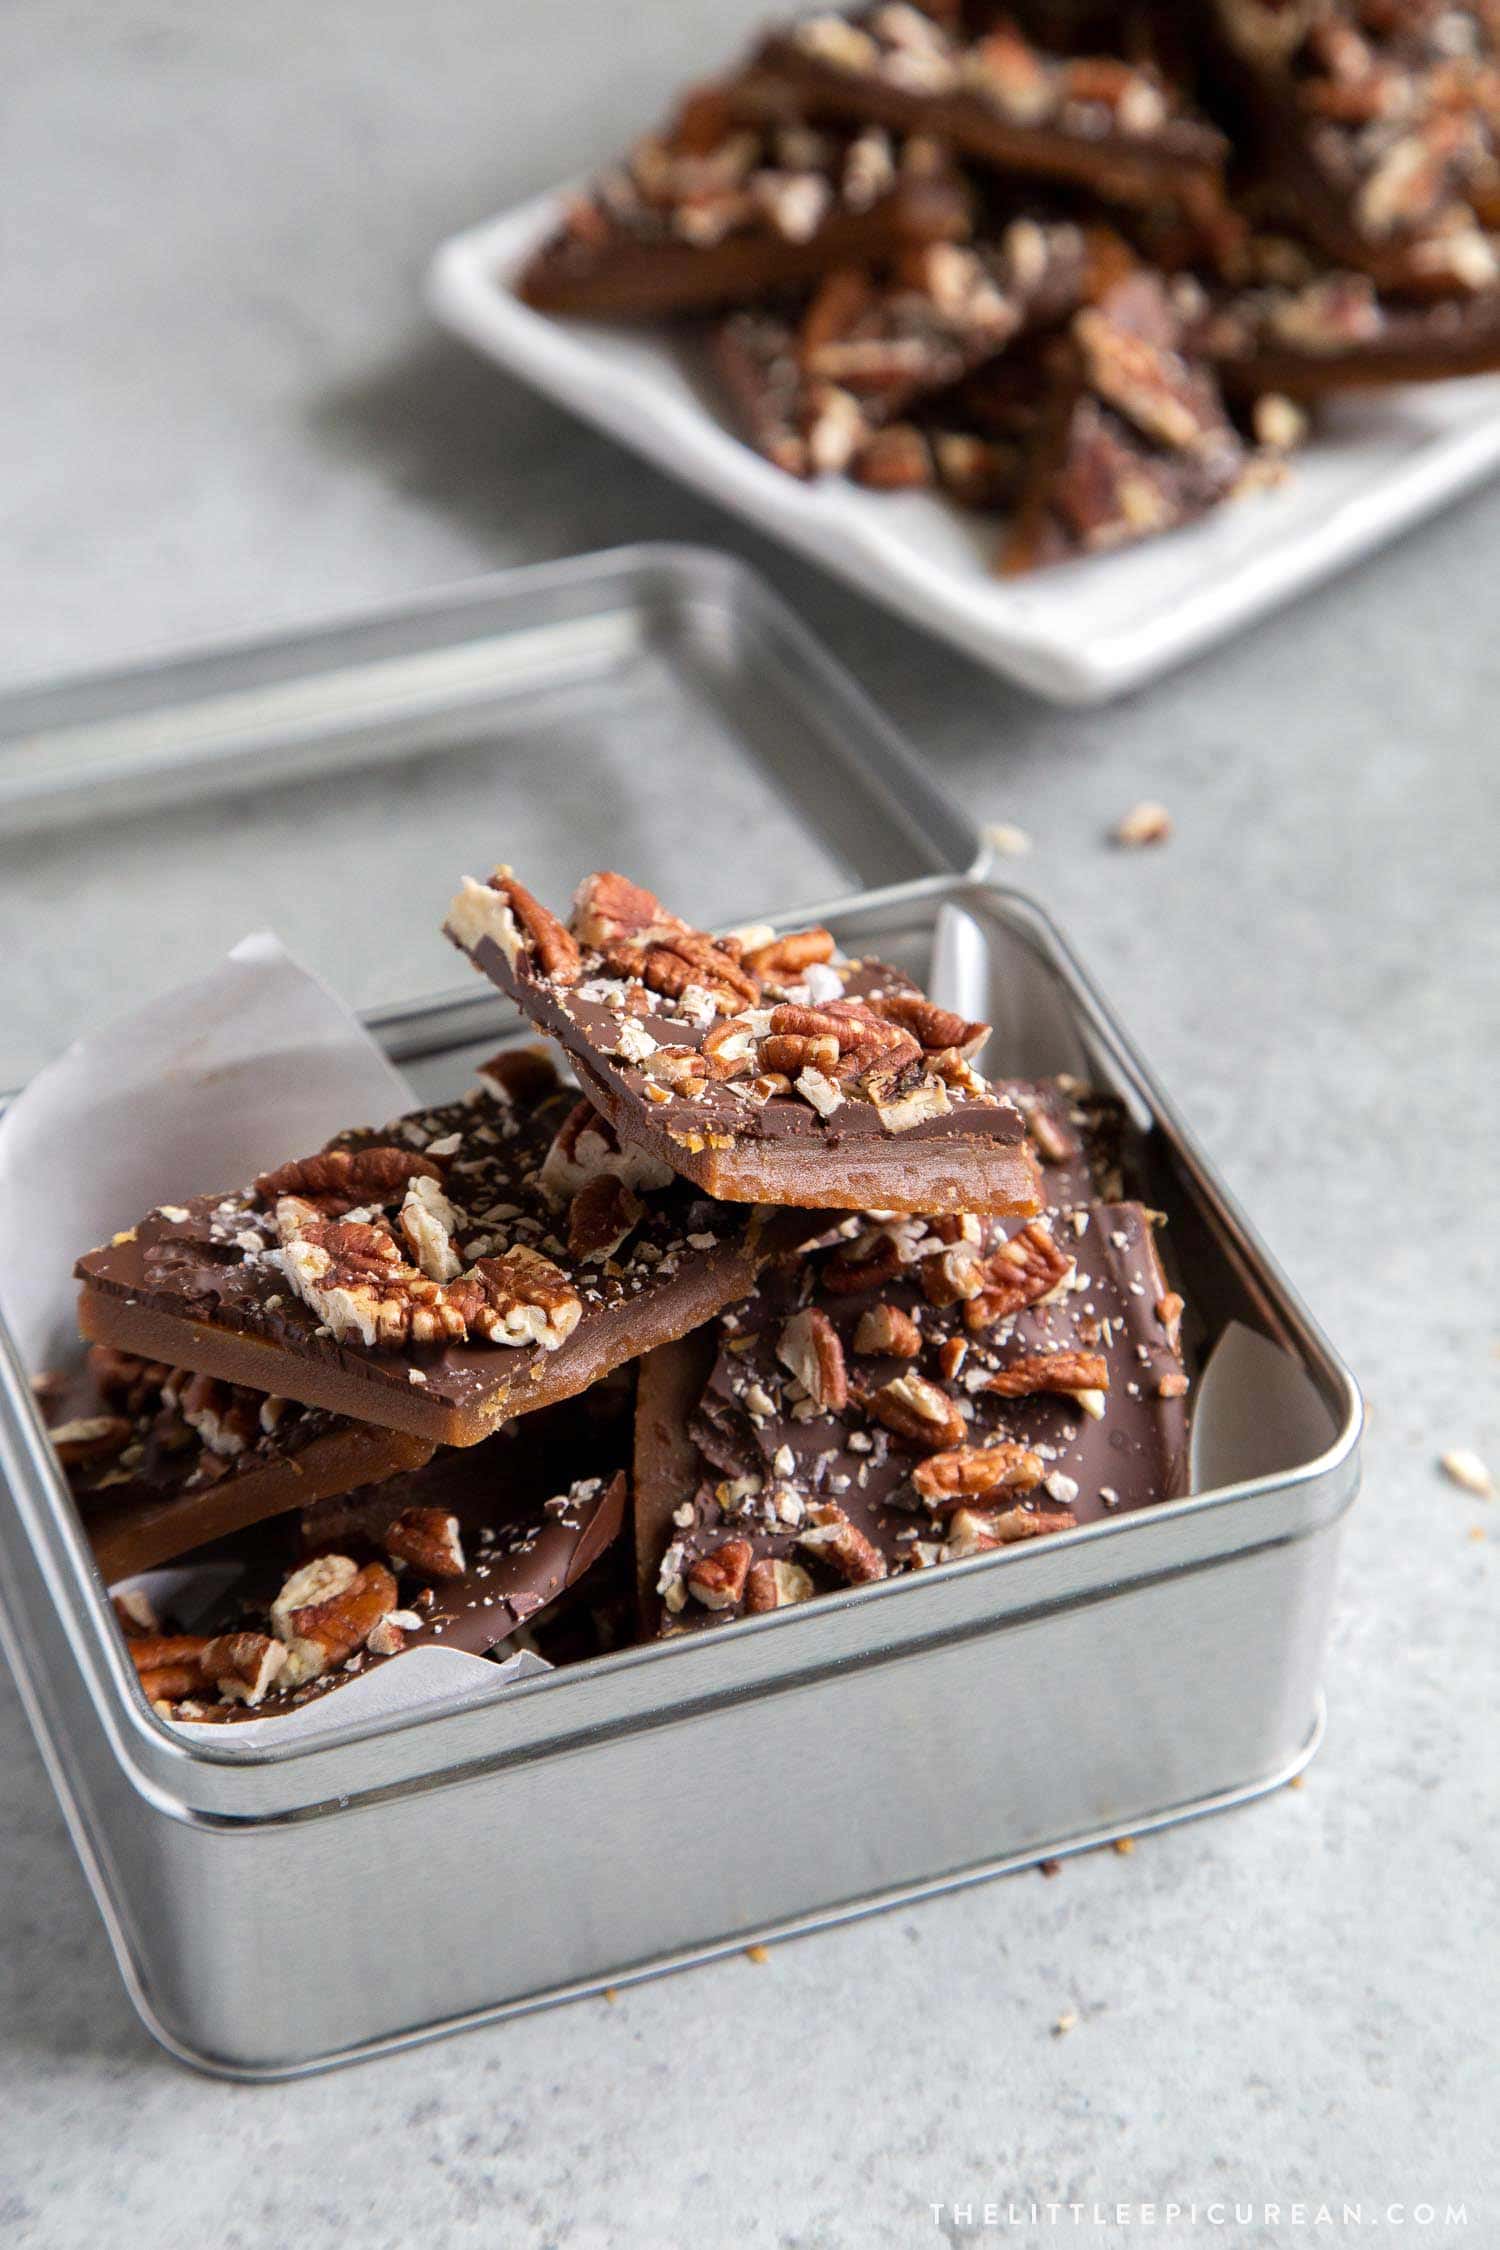 Homemade Pecan Chocolate Toffee Bark. This easy recipe is perfect for holiday gift giving. These DIY toffee candies make for great hostess gifts! #holidays #homemadegifts #DIY #homemadetoffee #toffee #toffeebark #chocolate